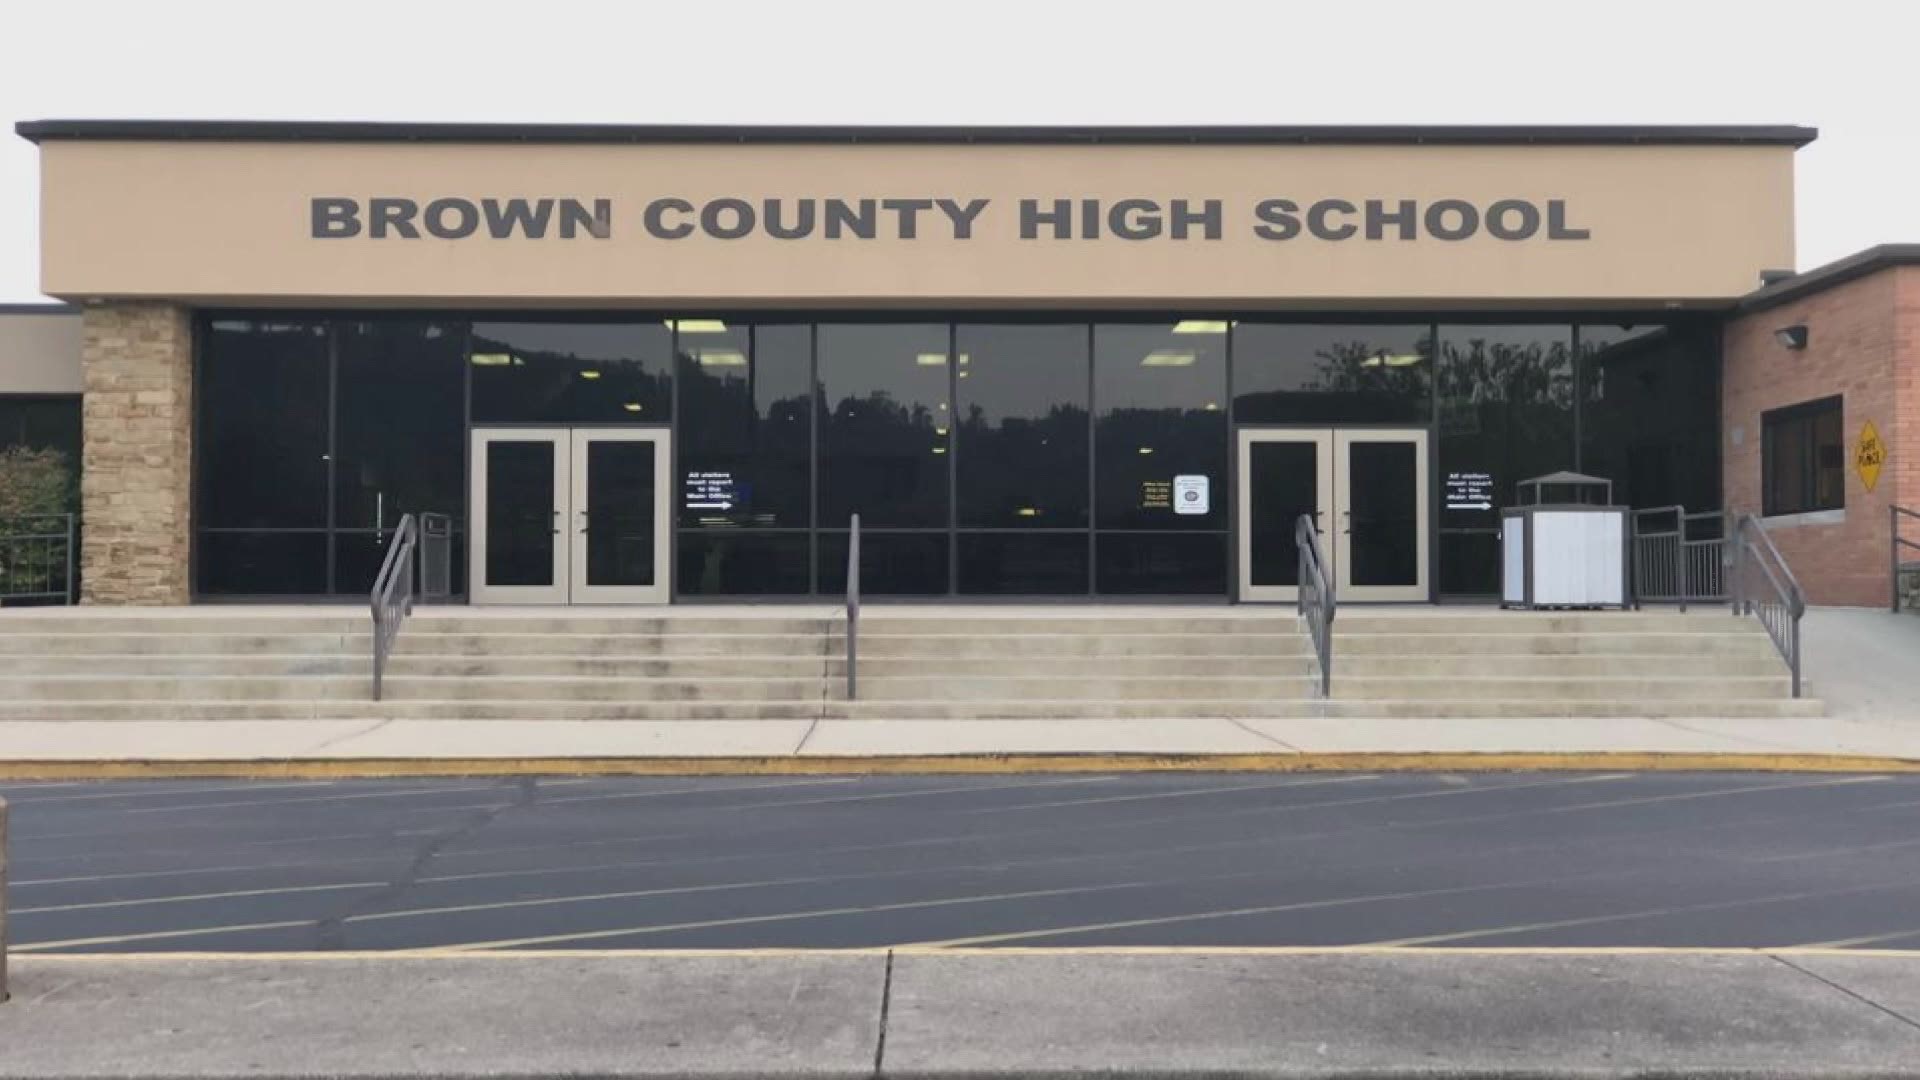 Brown County High's 2020 yearbook listed a student as 'Black guy' instead of using his name.